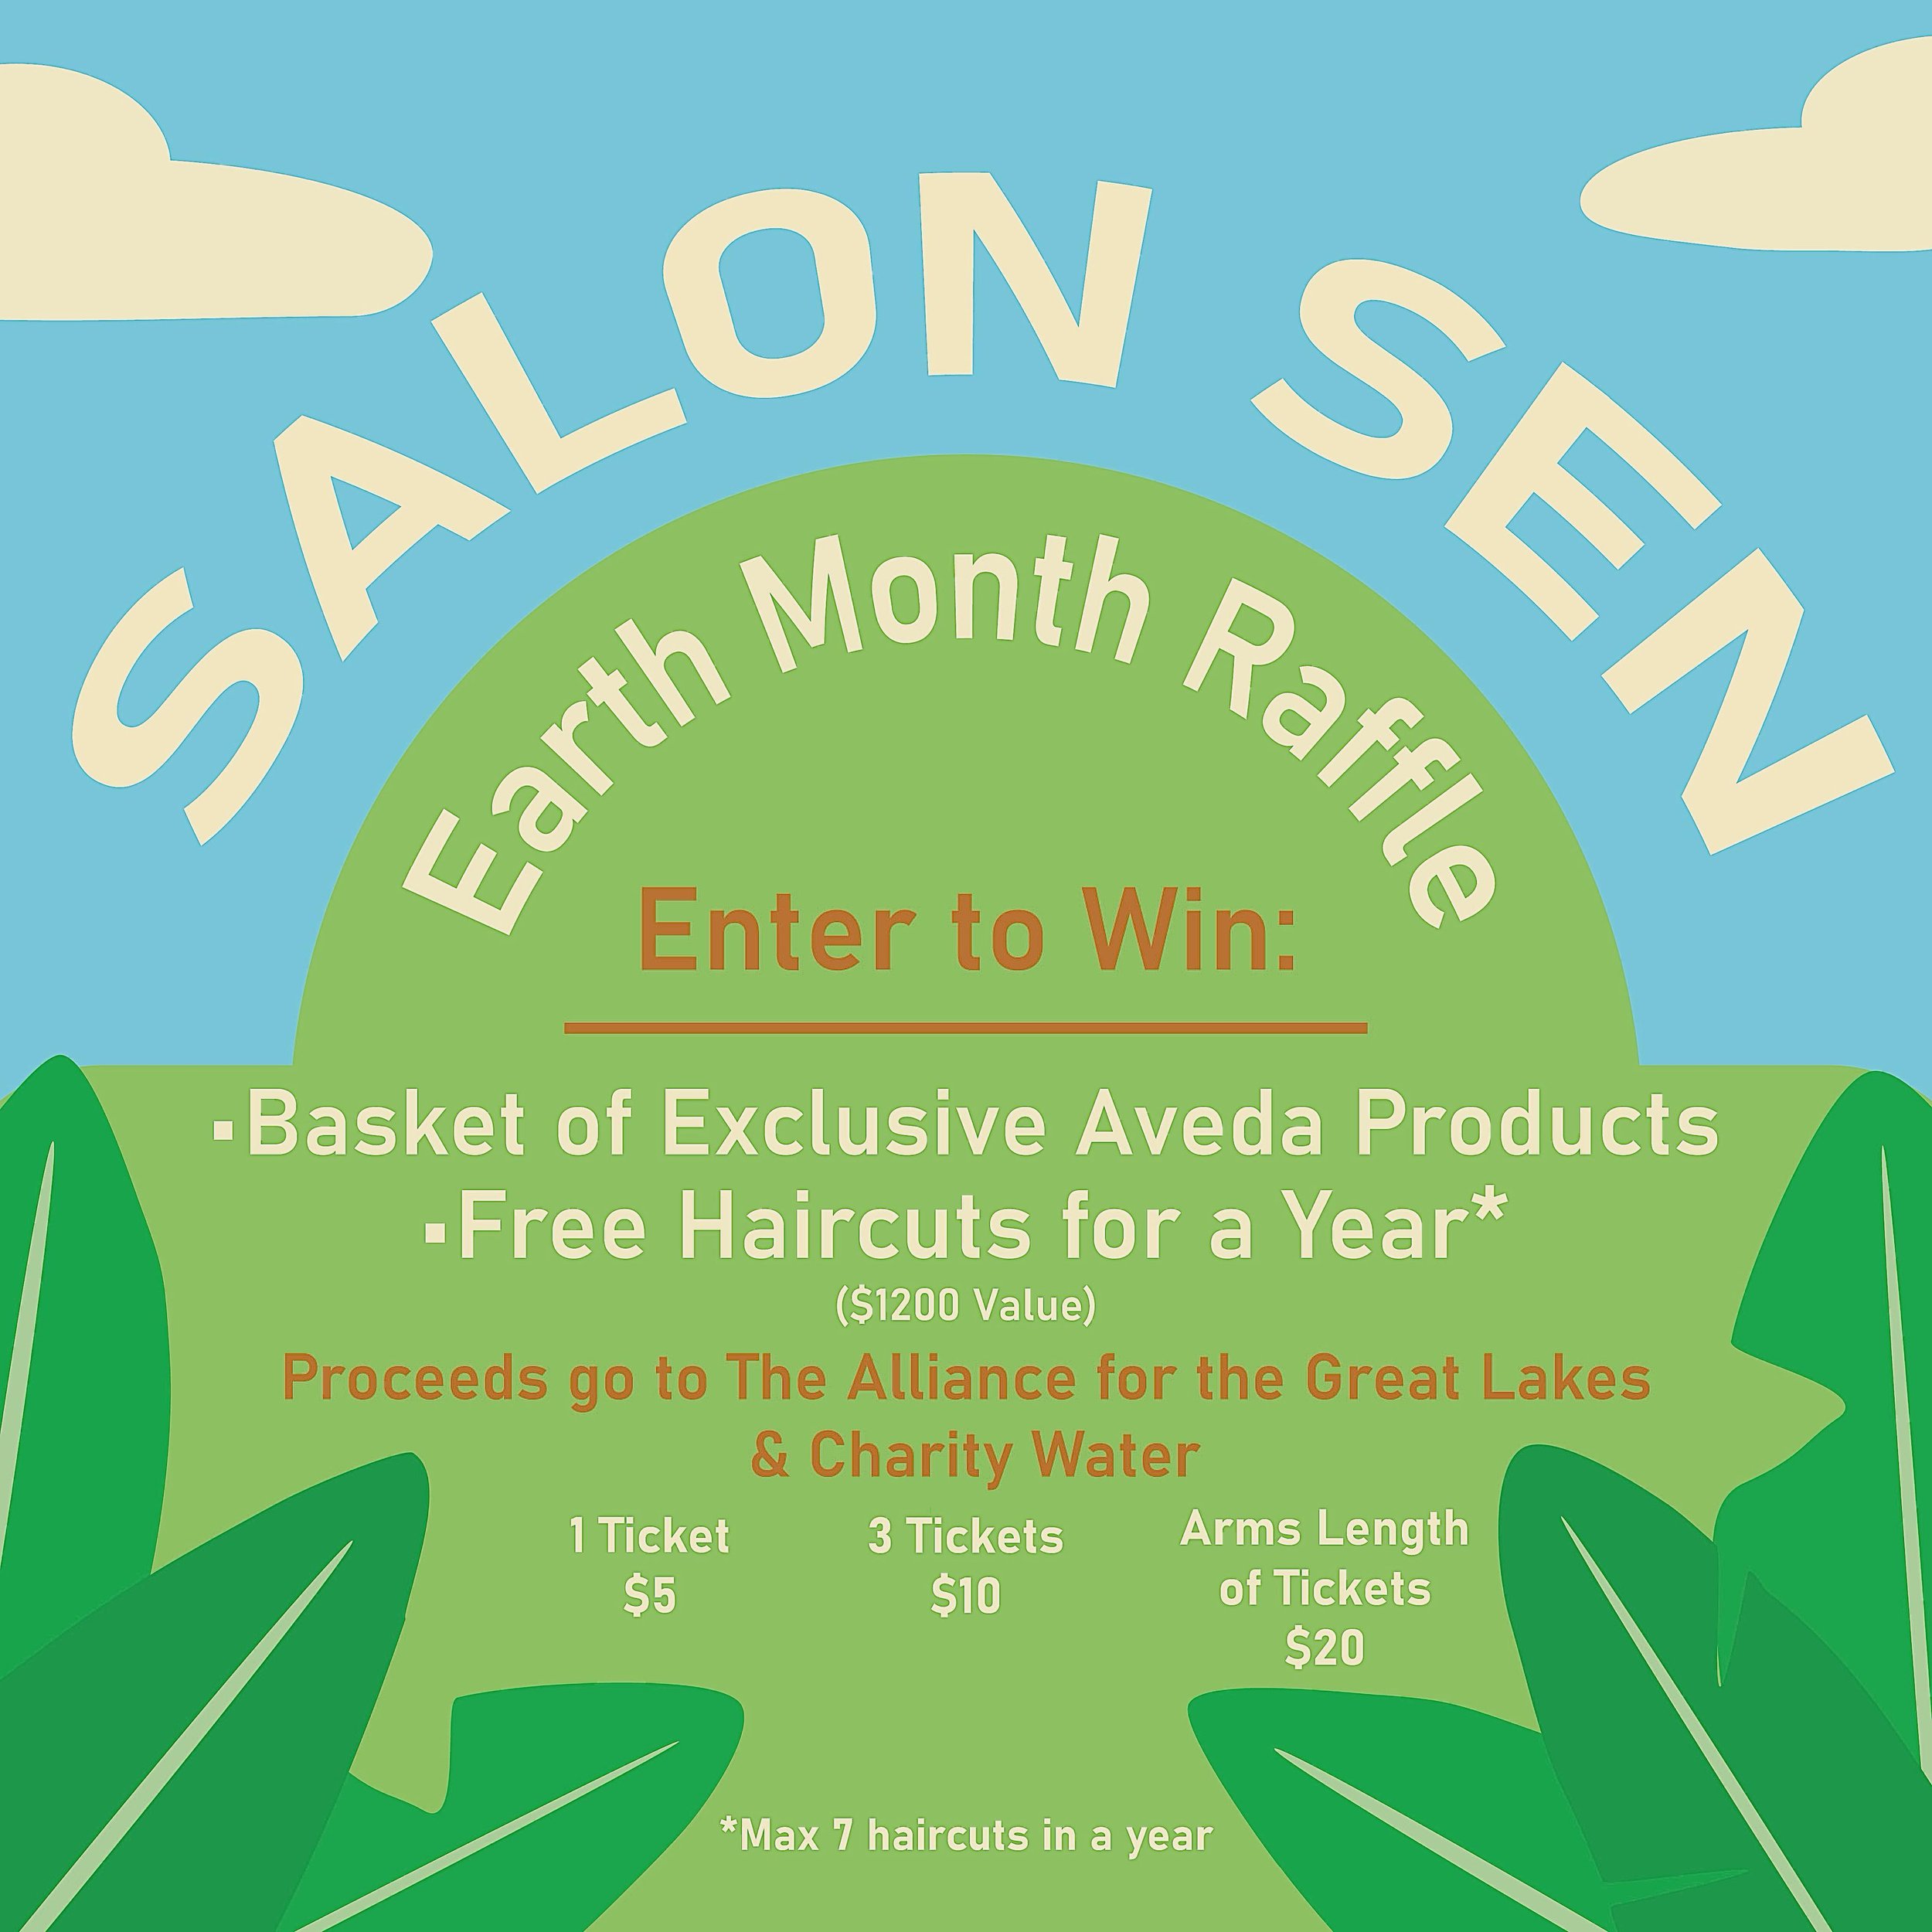 ✨We&rsquo;re back with our annual EARTH MONTH RAFFLE 🌎✨Don&rsquo;t miss your chance to win an EXCLUSIVE basket of Aveda products along with FREE haircuts for a year!*✂️
All proceeds will be going to The Alliance for the Great Lakes &amp; Charity Wat